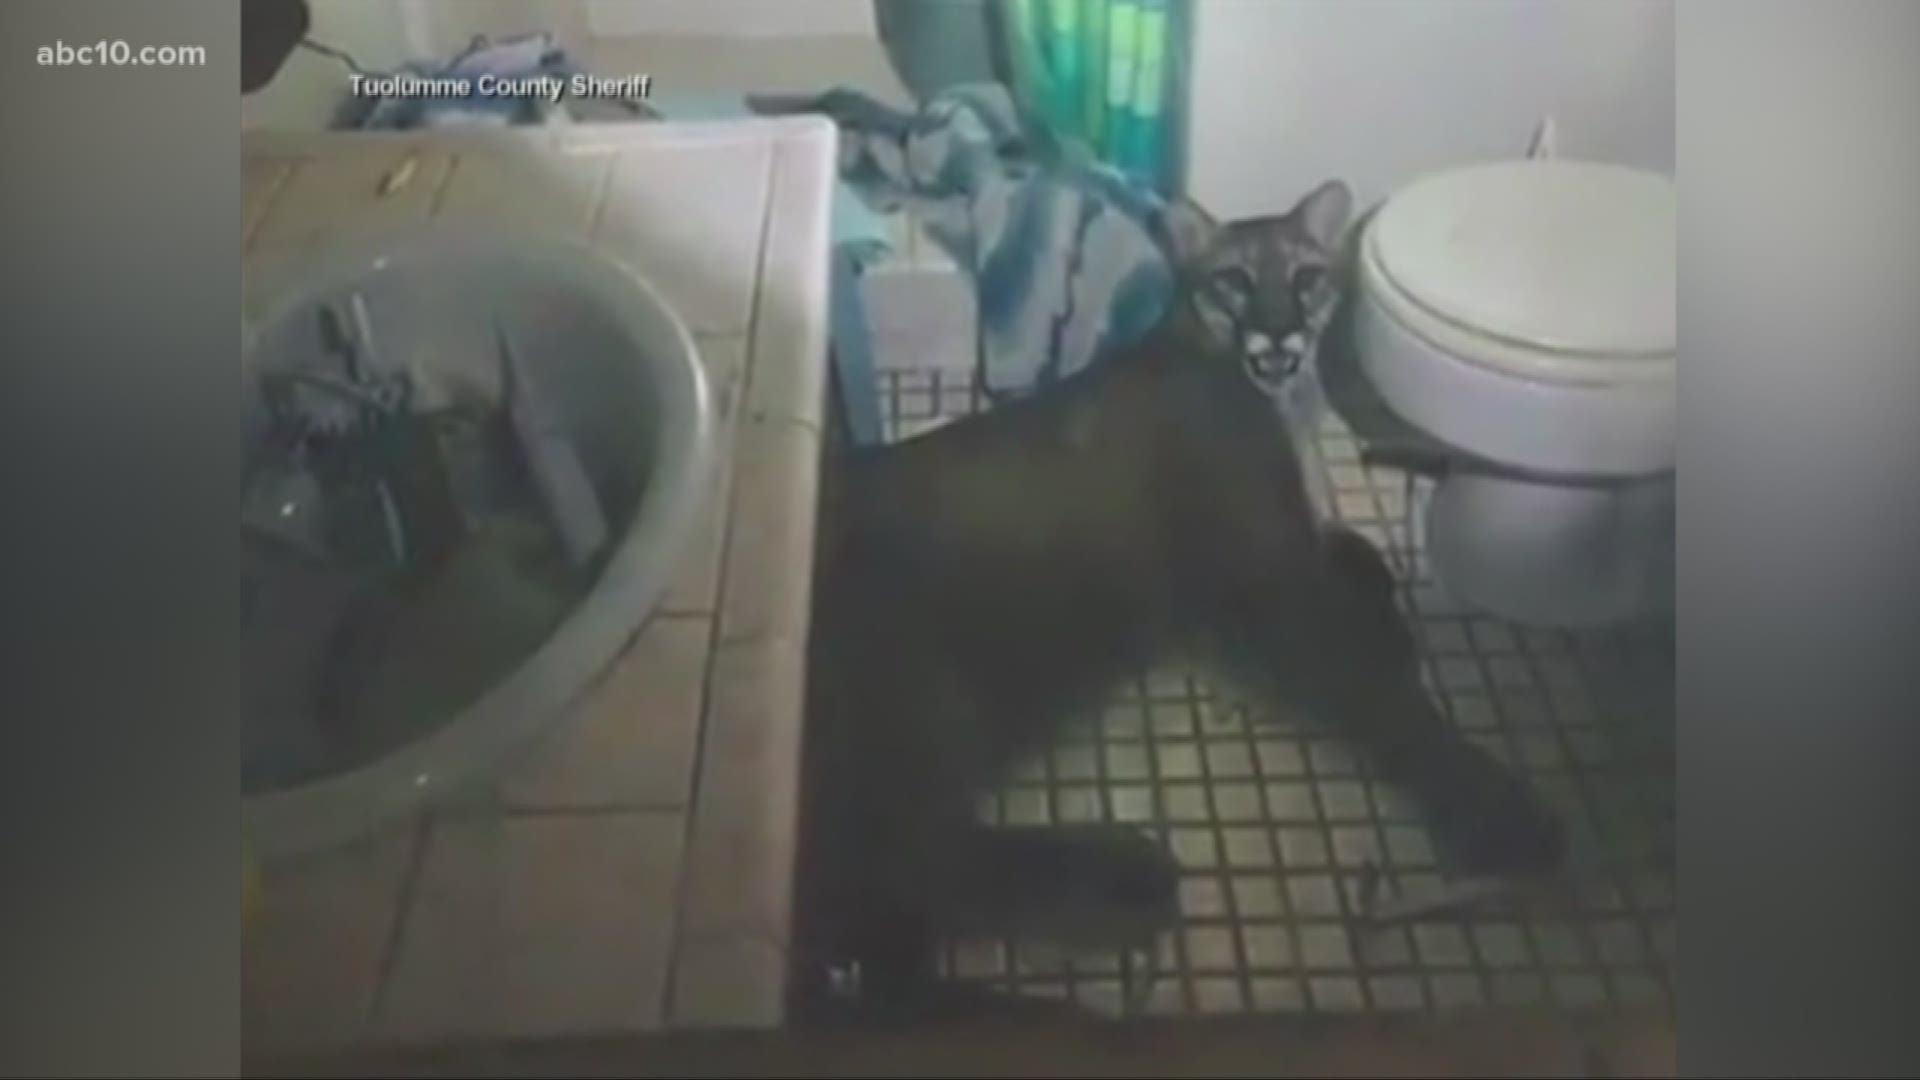 Officials say a mountain lion wandered inside a California house and was captured in a photo lying on a bathroom floor.